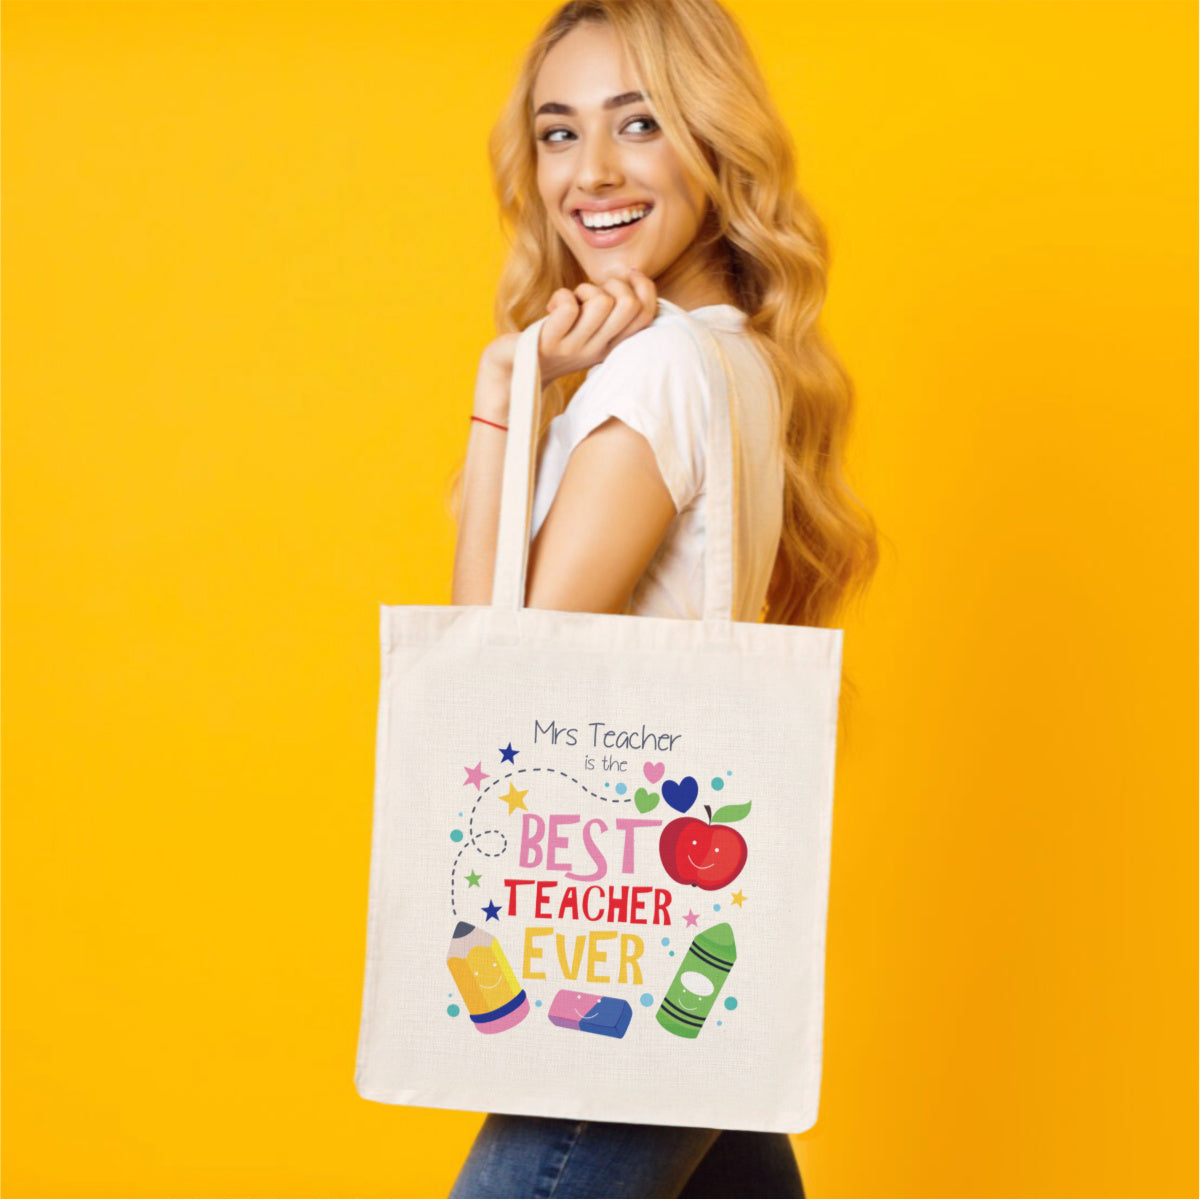 Best teacher ever personalised tote bag with stationery and apple